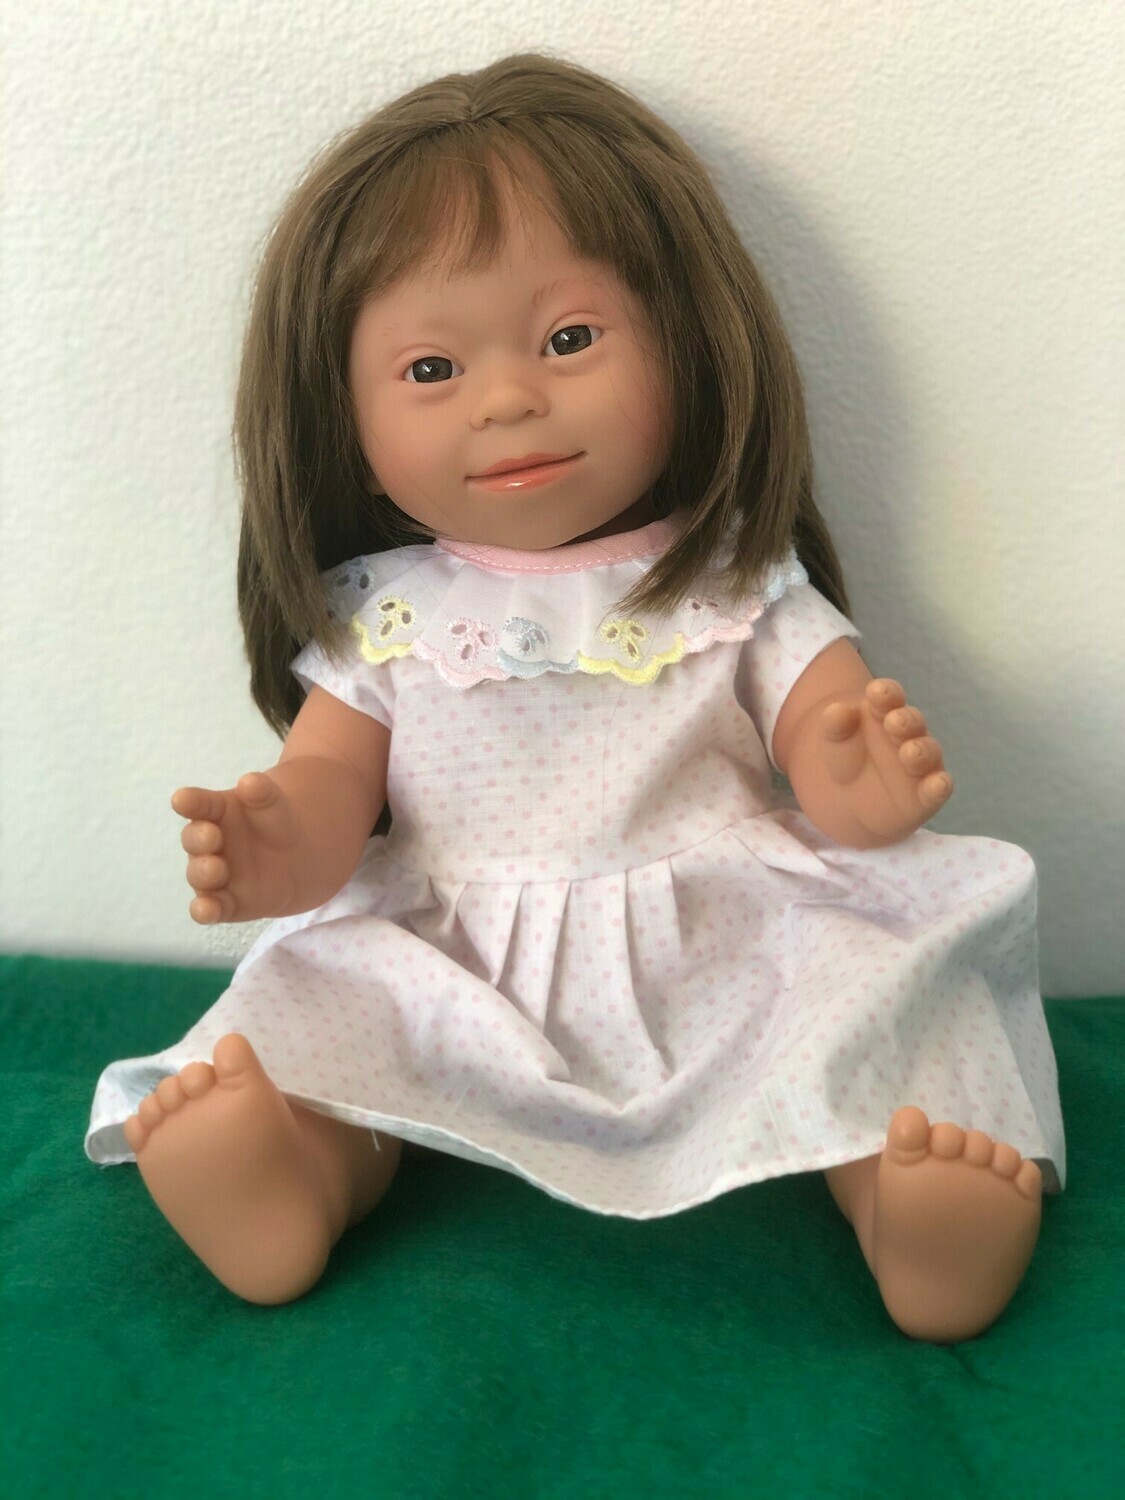 Doll with Down Syndrome facial features